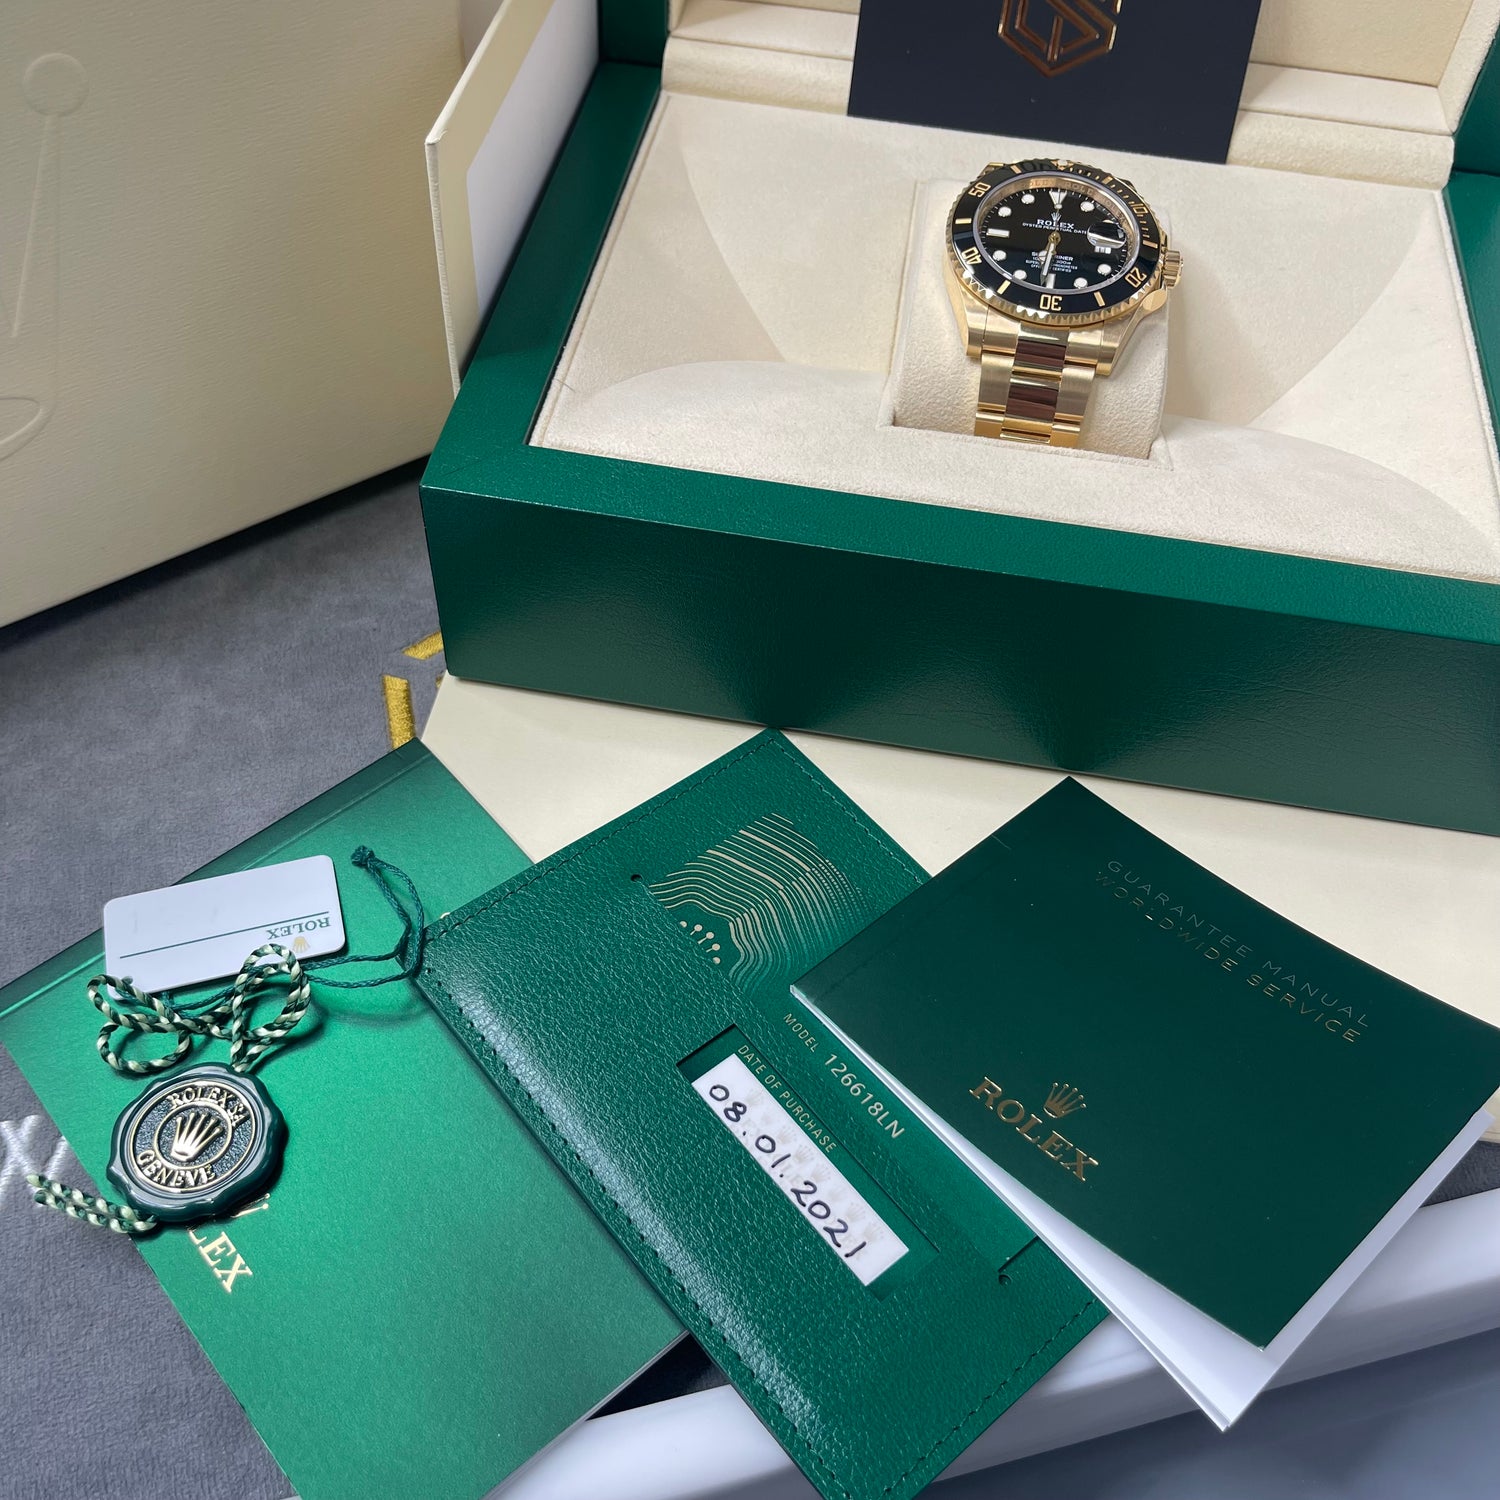 Rolex Submariner Date Yellow Gold Black Dial 126618LN 2021 Full Set Watch